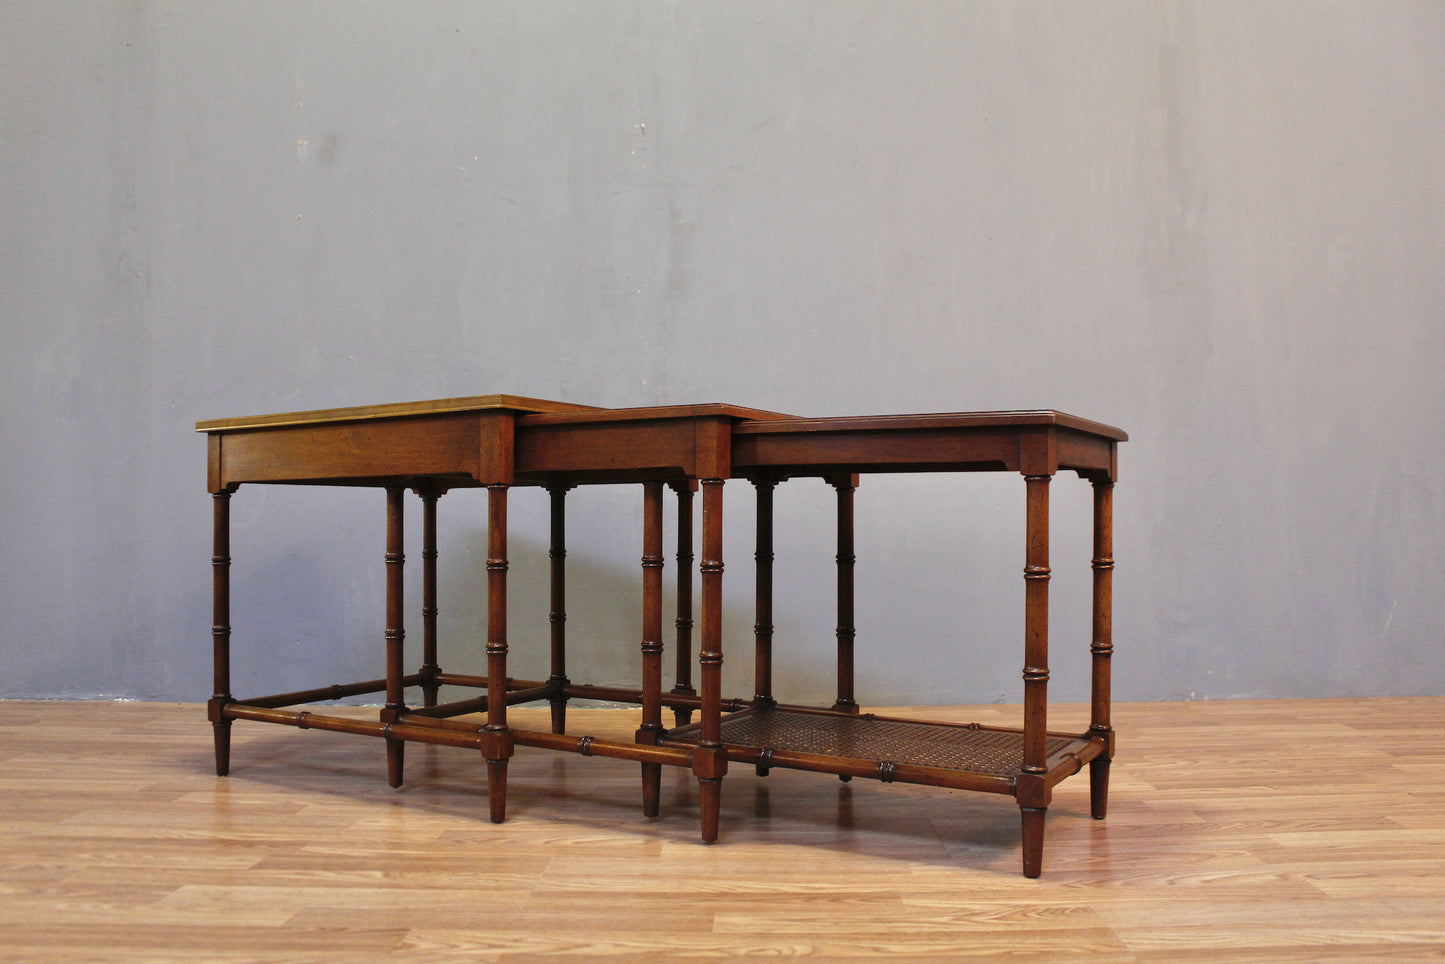 Country Enamel-Top Table with Built-In Leaves